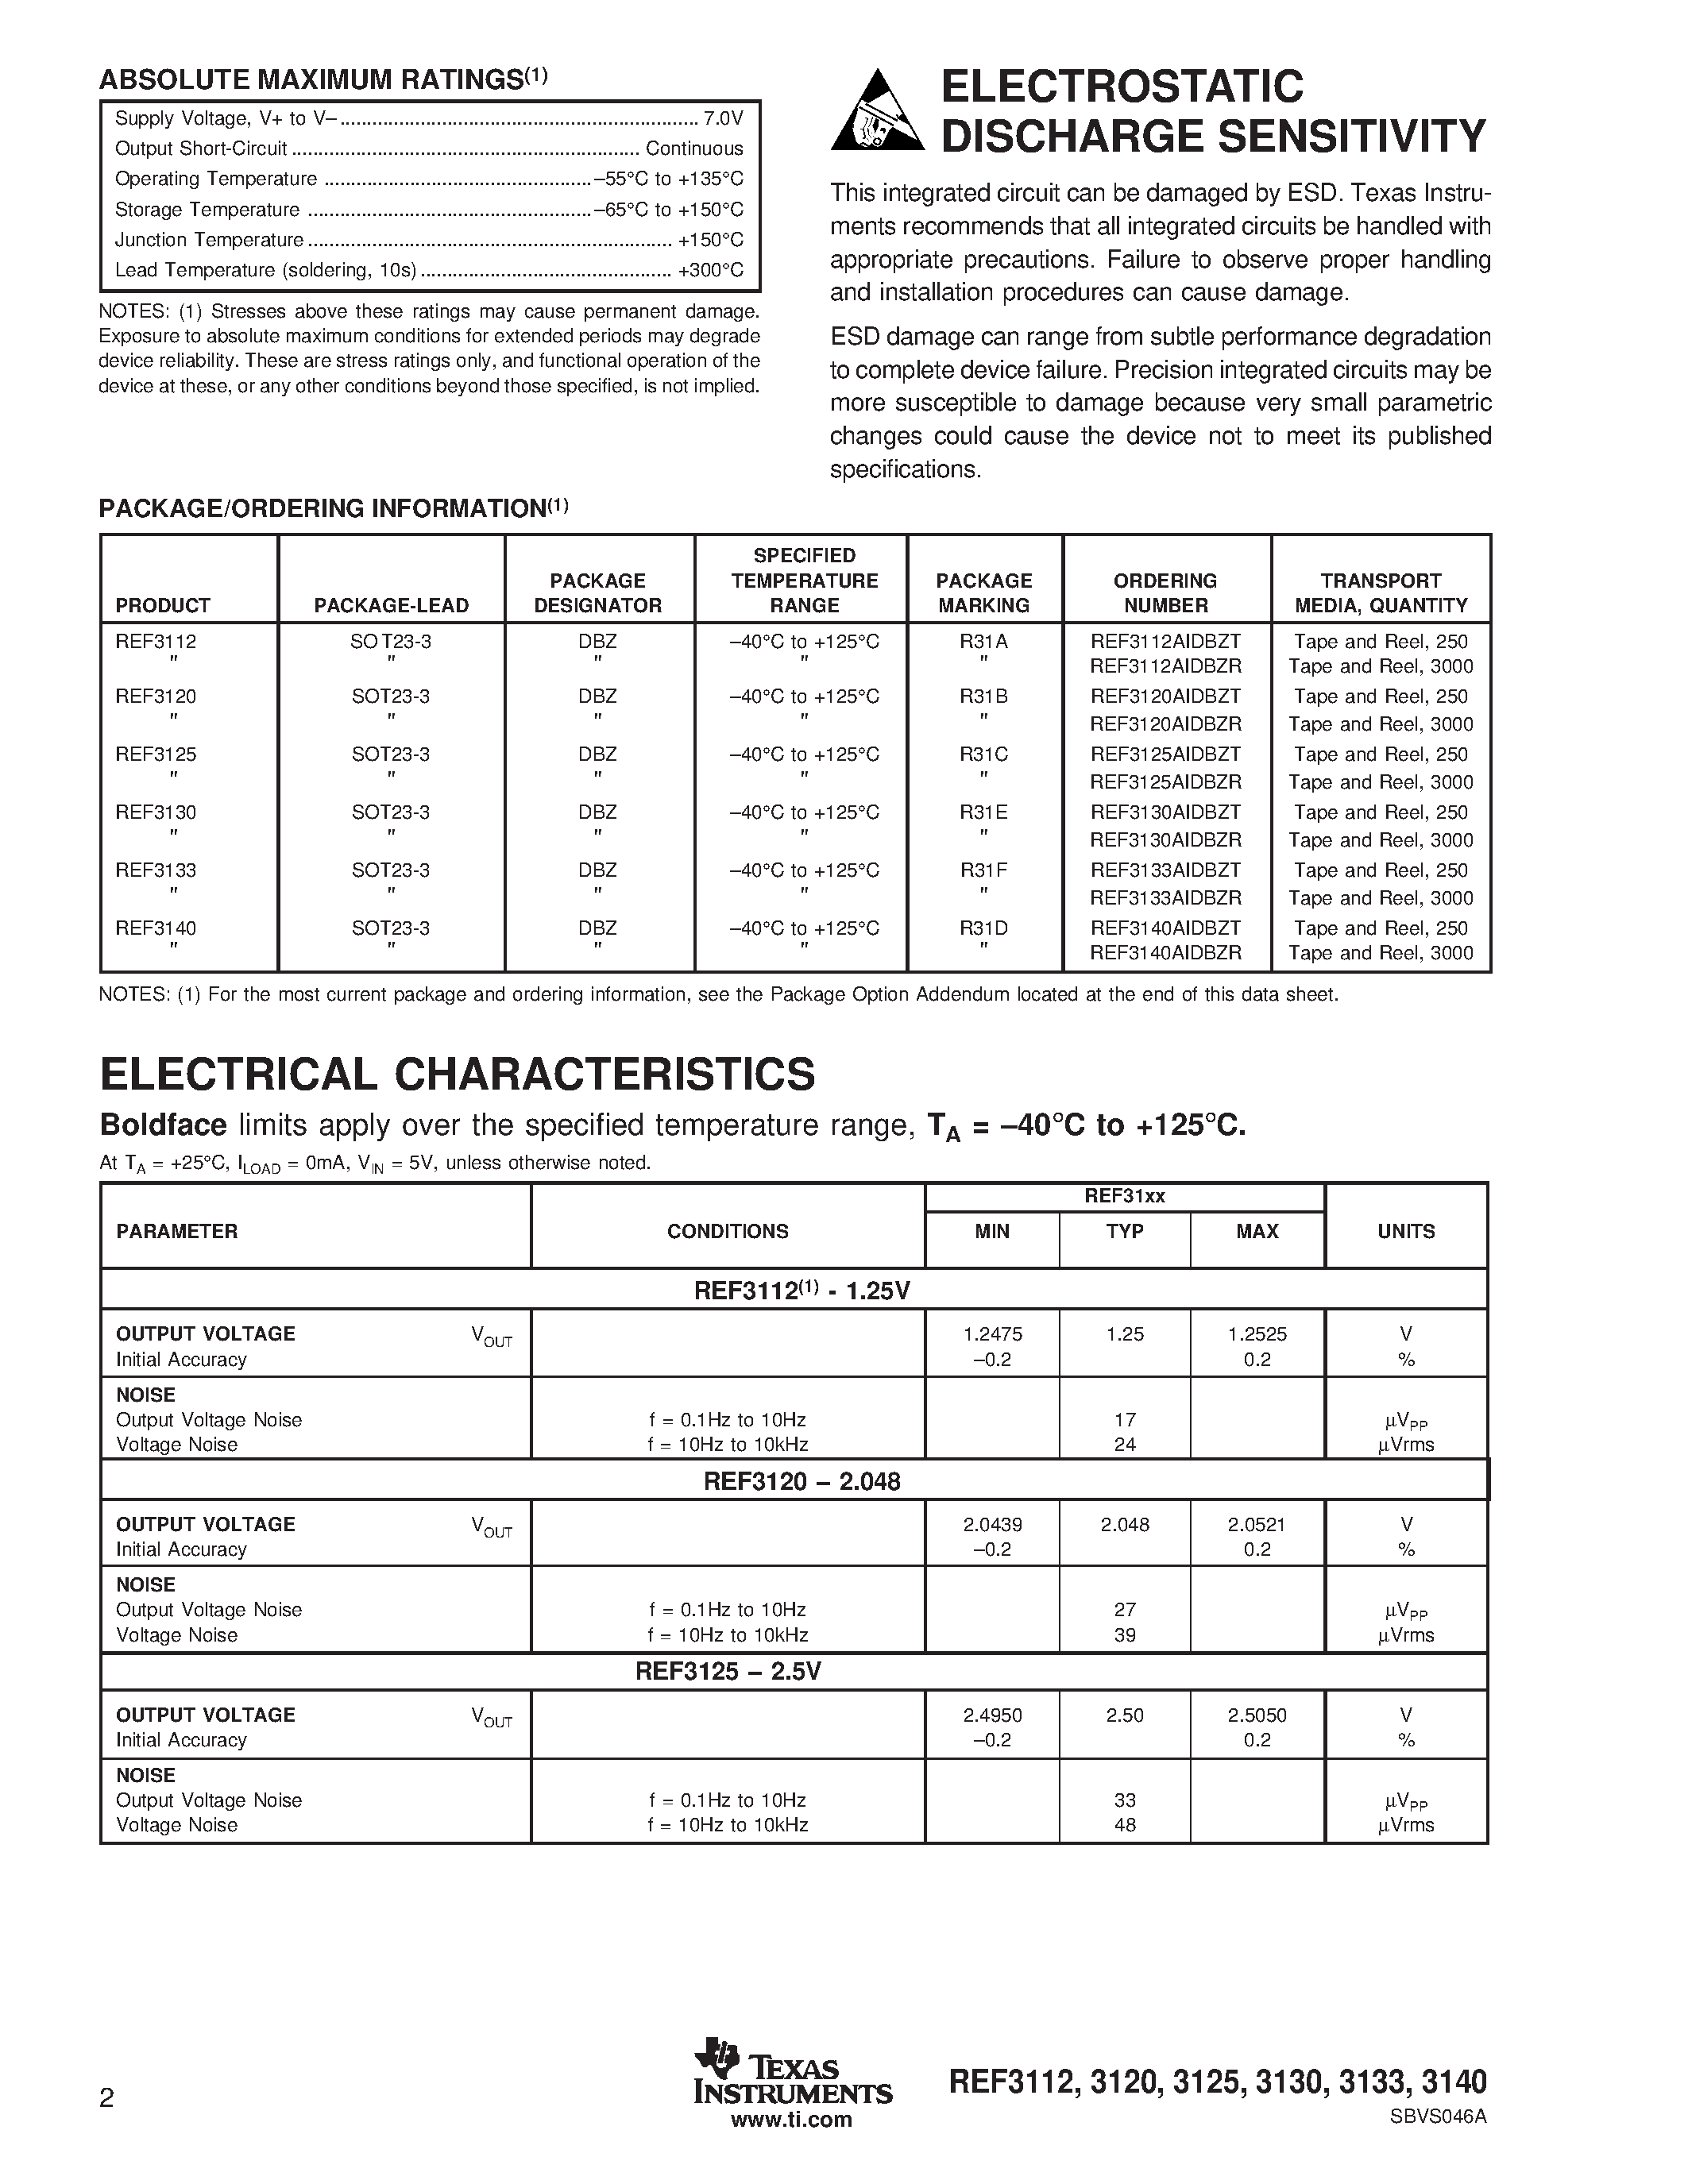 Datasheet REF3140AIDBZR - 15ppm/C Max/ 100UA/ SOT23-3 SERIES VOLTAGE REFERENCE page 2